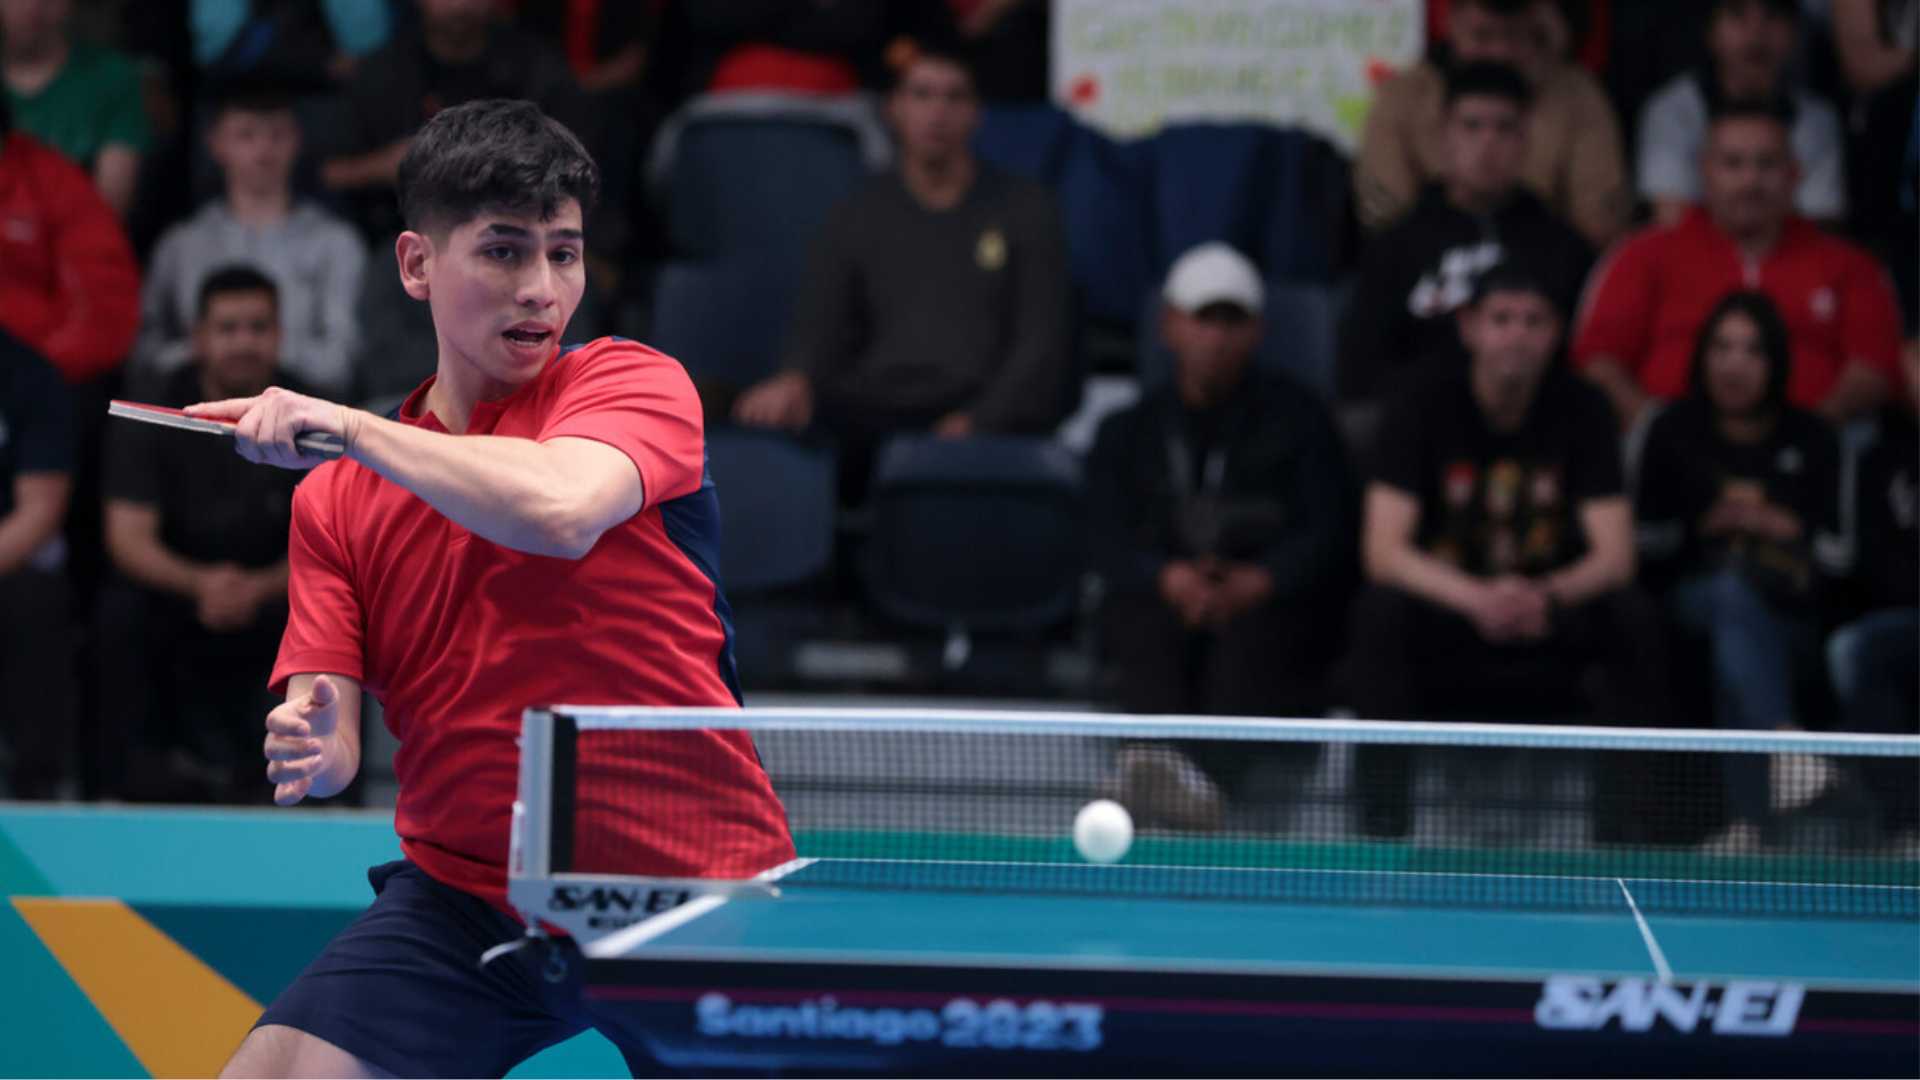 Chile makes a winning debut in the male’s singles table tennis